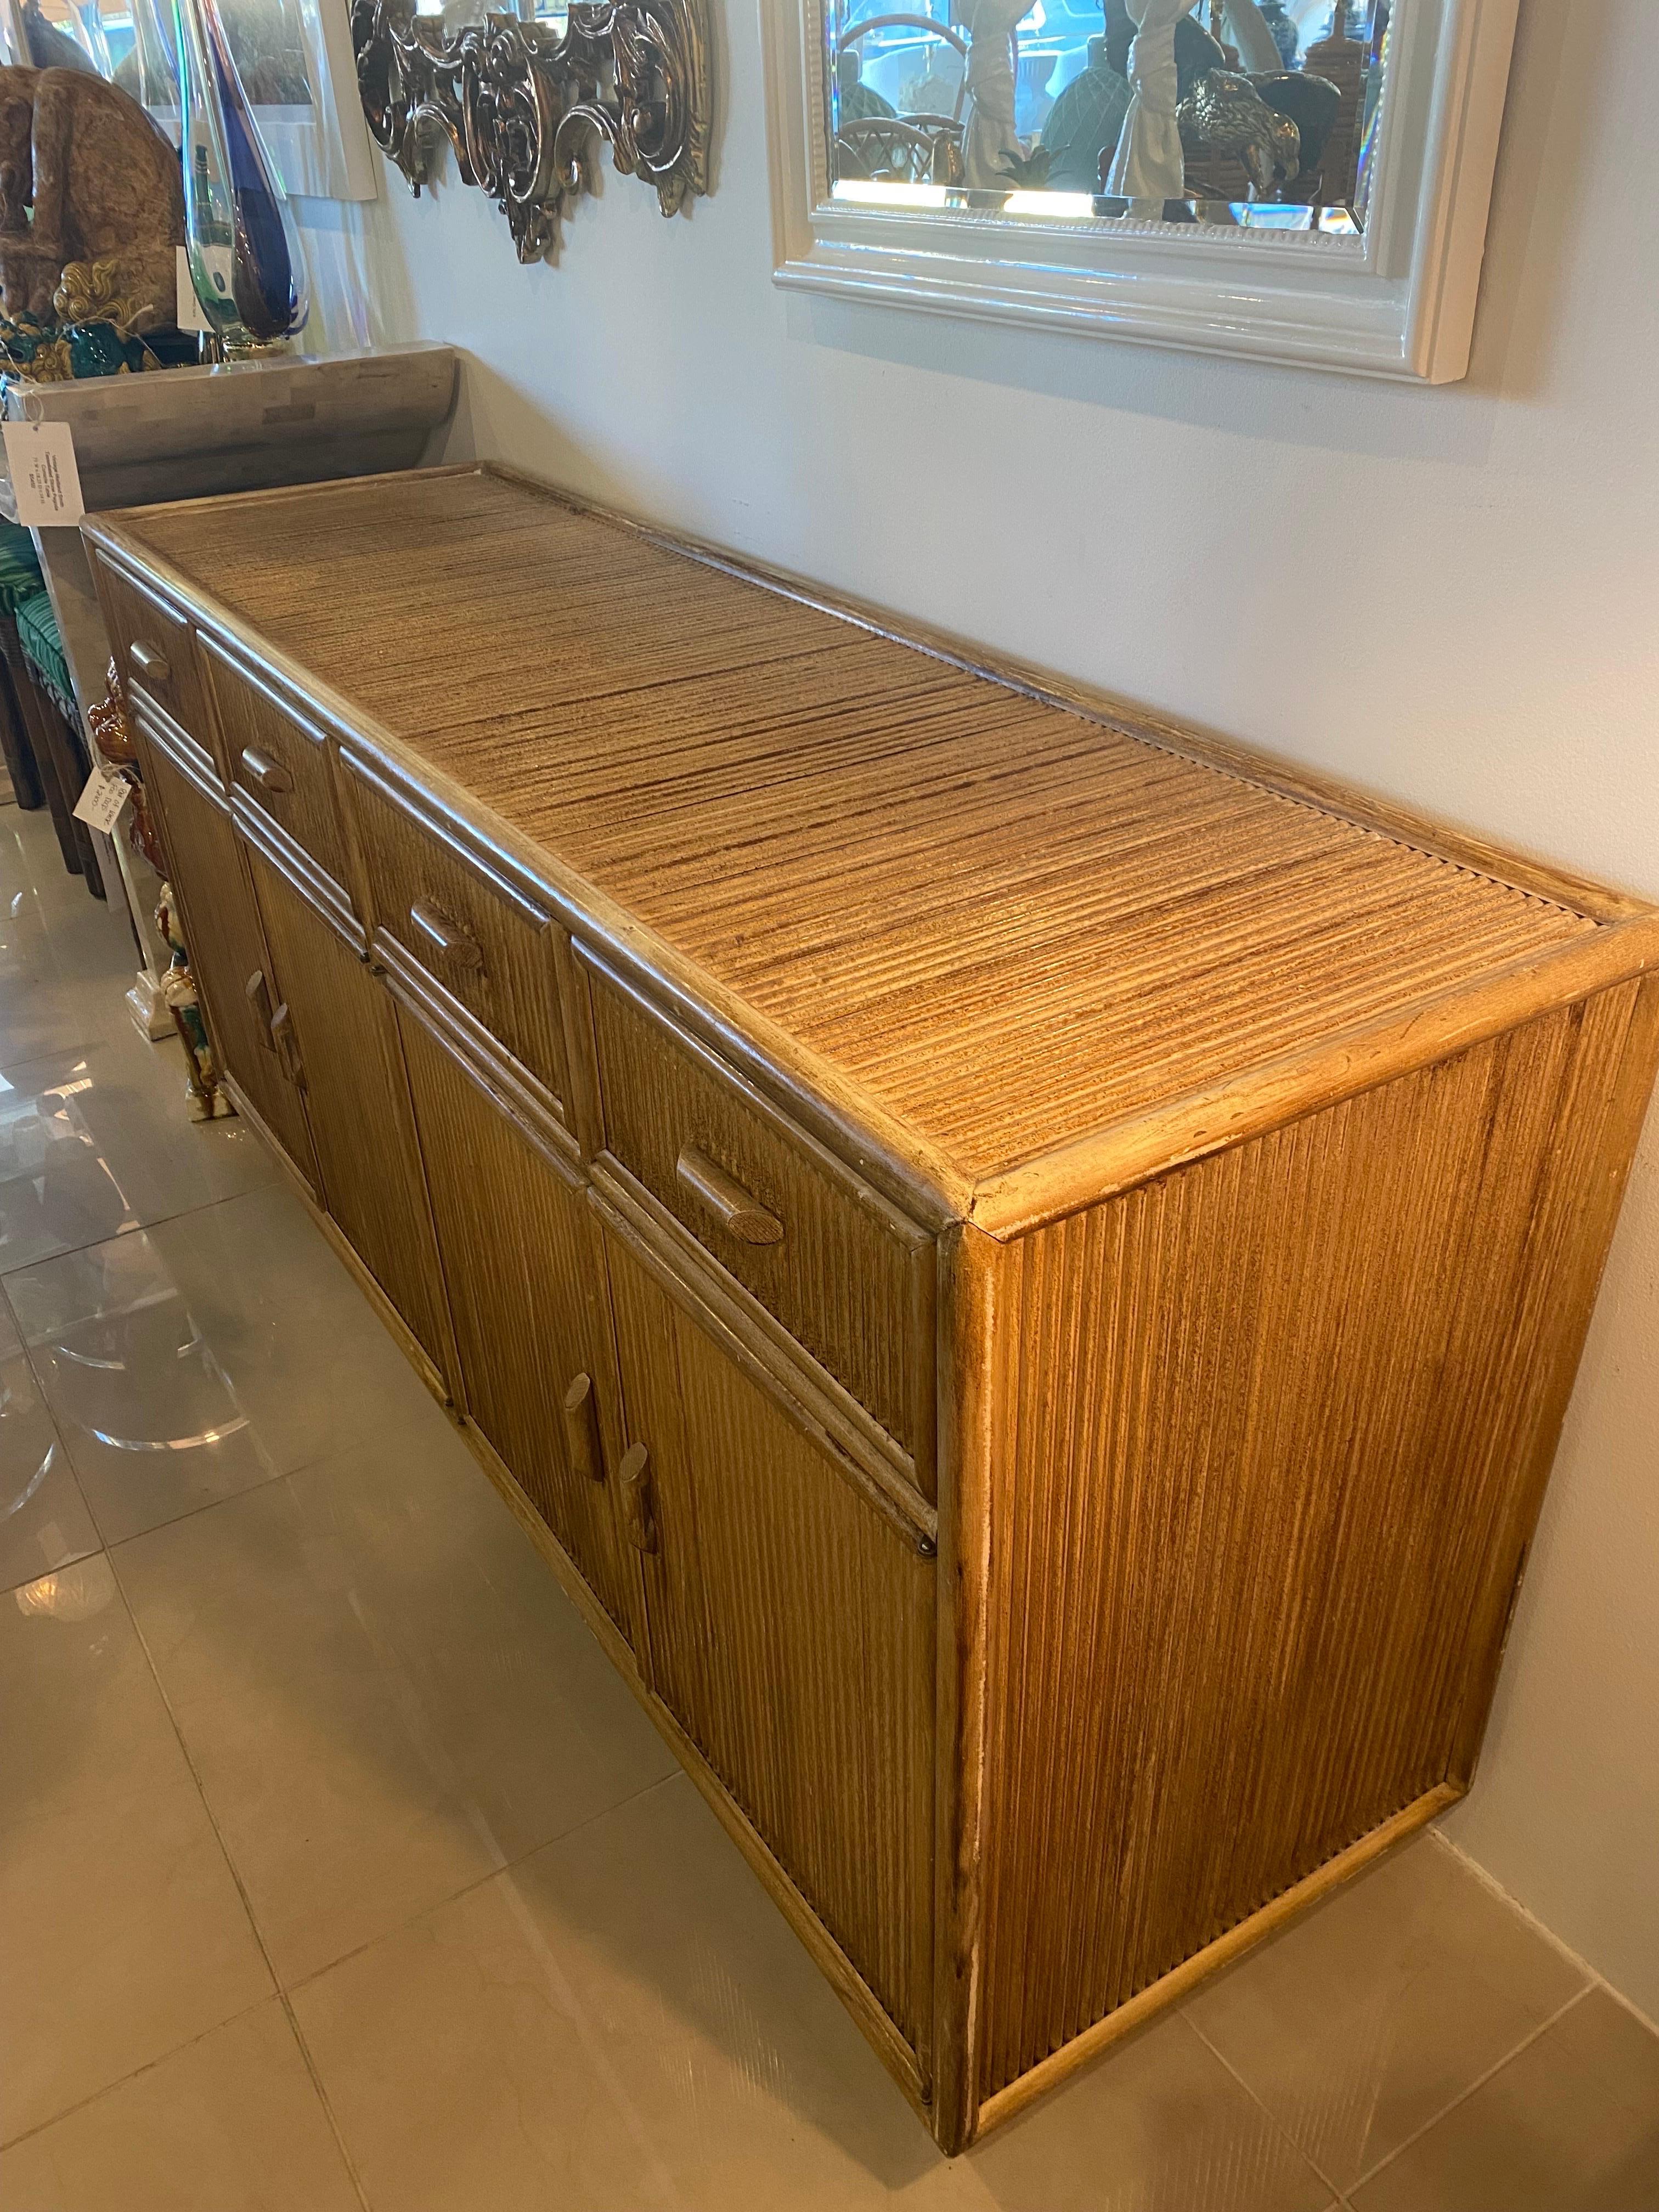 Late 20th Century Vintage Palm Beach Bamboo Pencil Reed Credenza Cabinet Buffet Drawers Dresser  For Sale